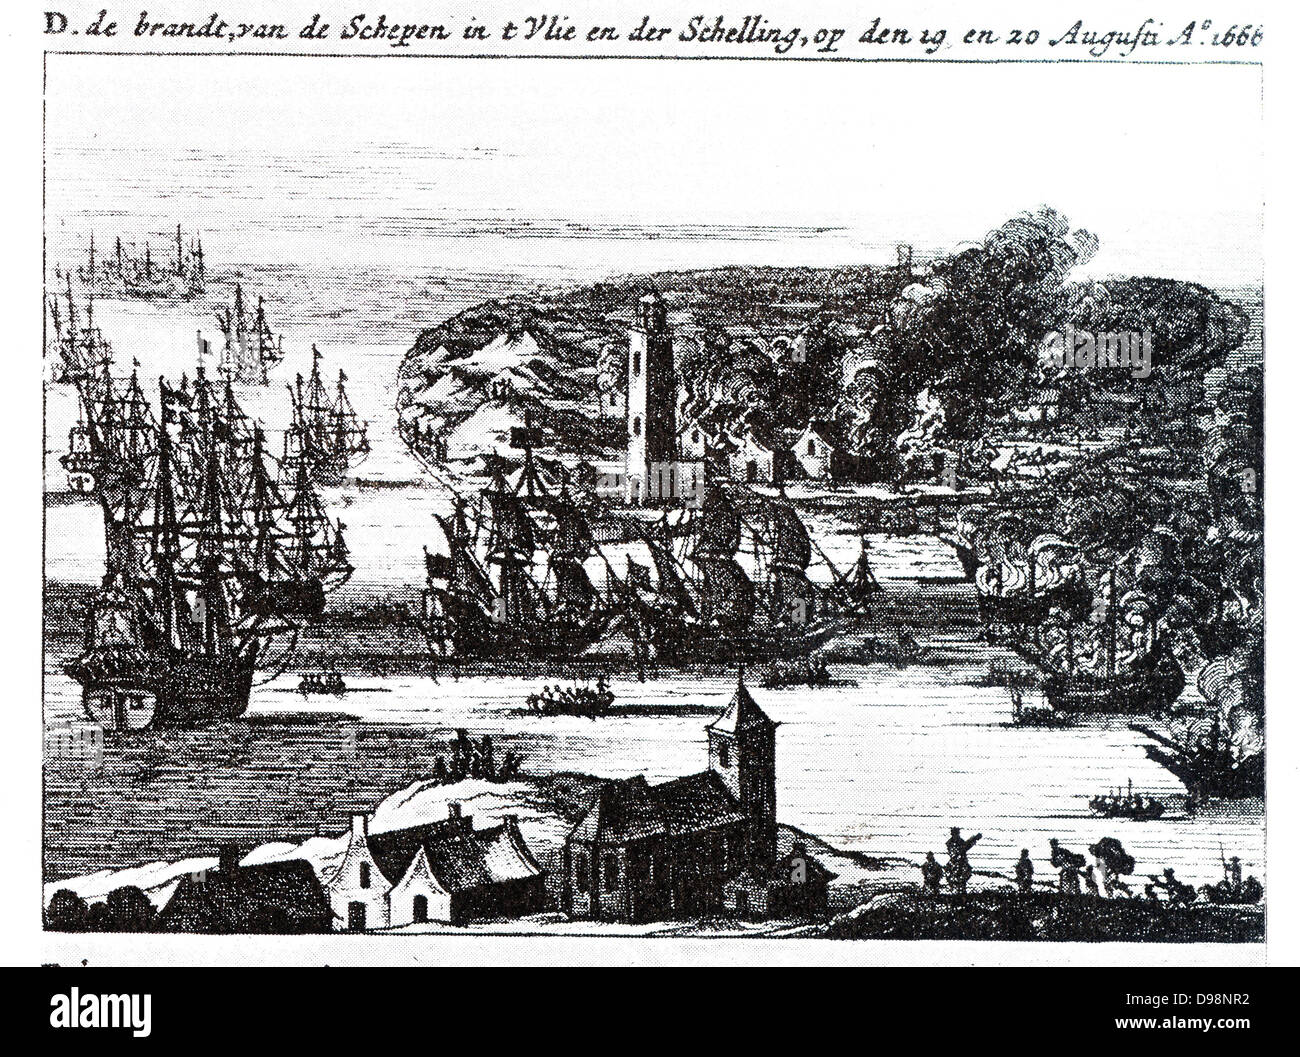 The Raid on the Medway, sometimes called the Battle of the Medway, Raid on Chatham or the Battle of Chatham, was a successful Dutch attack on the largest English naval ships, laid up in the dockyards of their main naval base Chatham, that took place in June 1667 during the Second Anglo-Dutch War. The Dutch, under nominal command of Lieutenant-Admiral Michiel de Ruyter, bombarded and then captured the town of Sheerness, sailed up the River Thames to Gravesend, then up the River Medway to Chatham Stock Photo